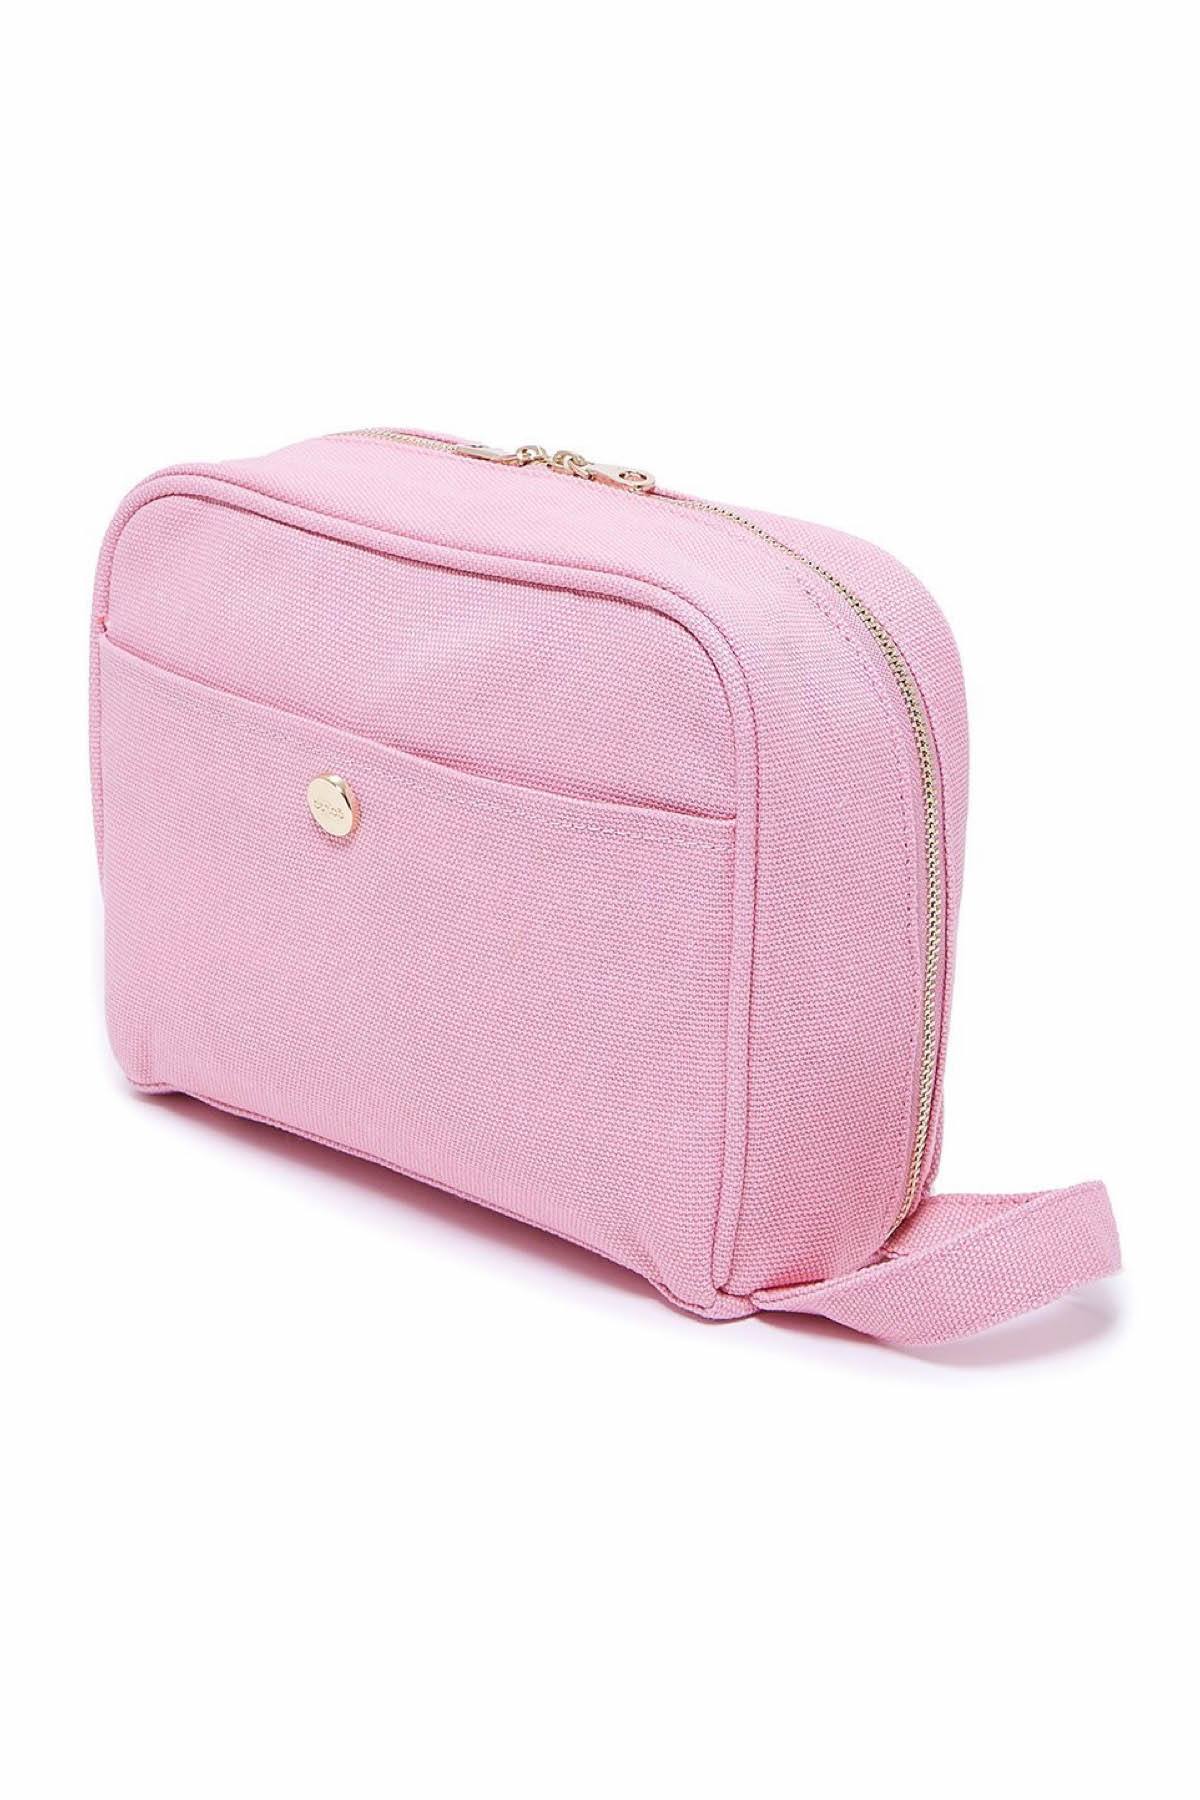 Ban.do Pink Available For Weekends Toiletries Bag